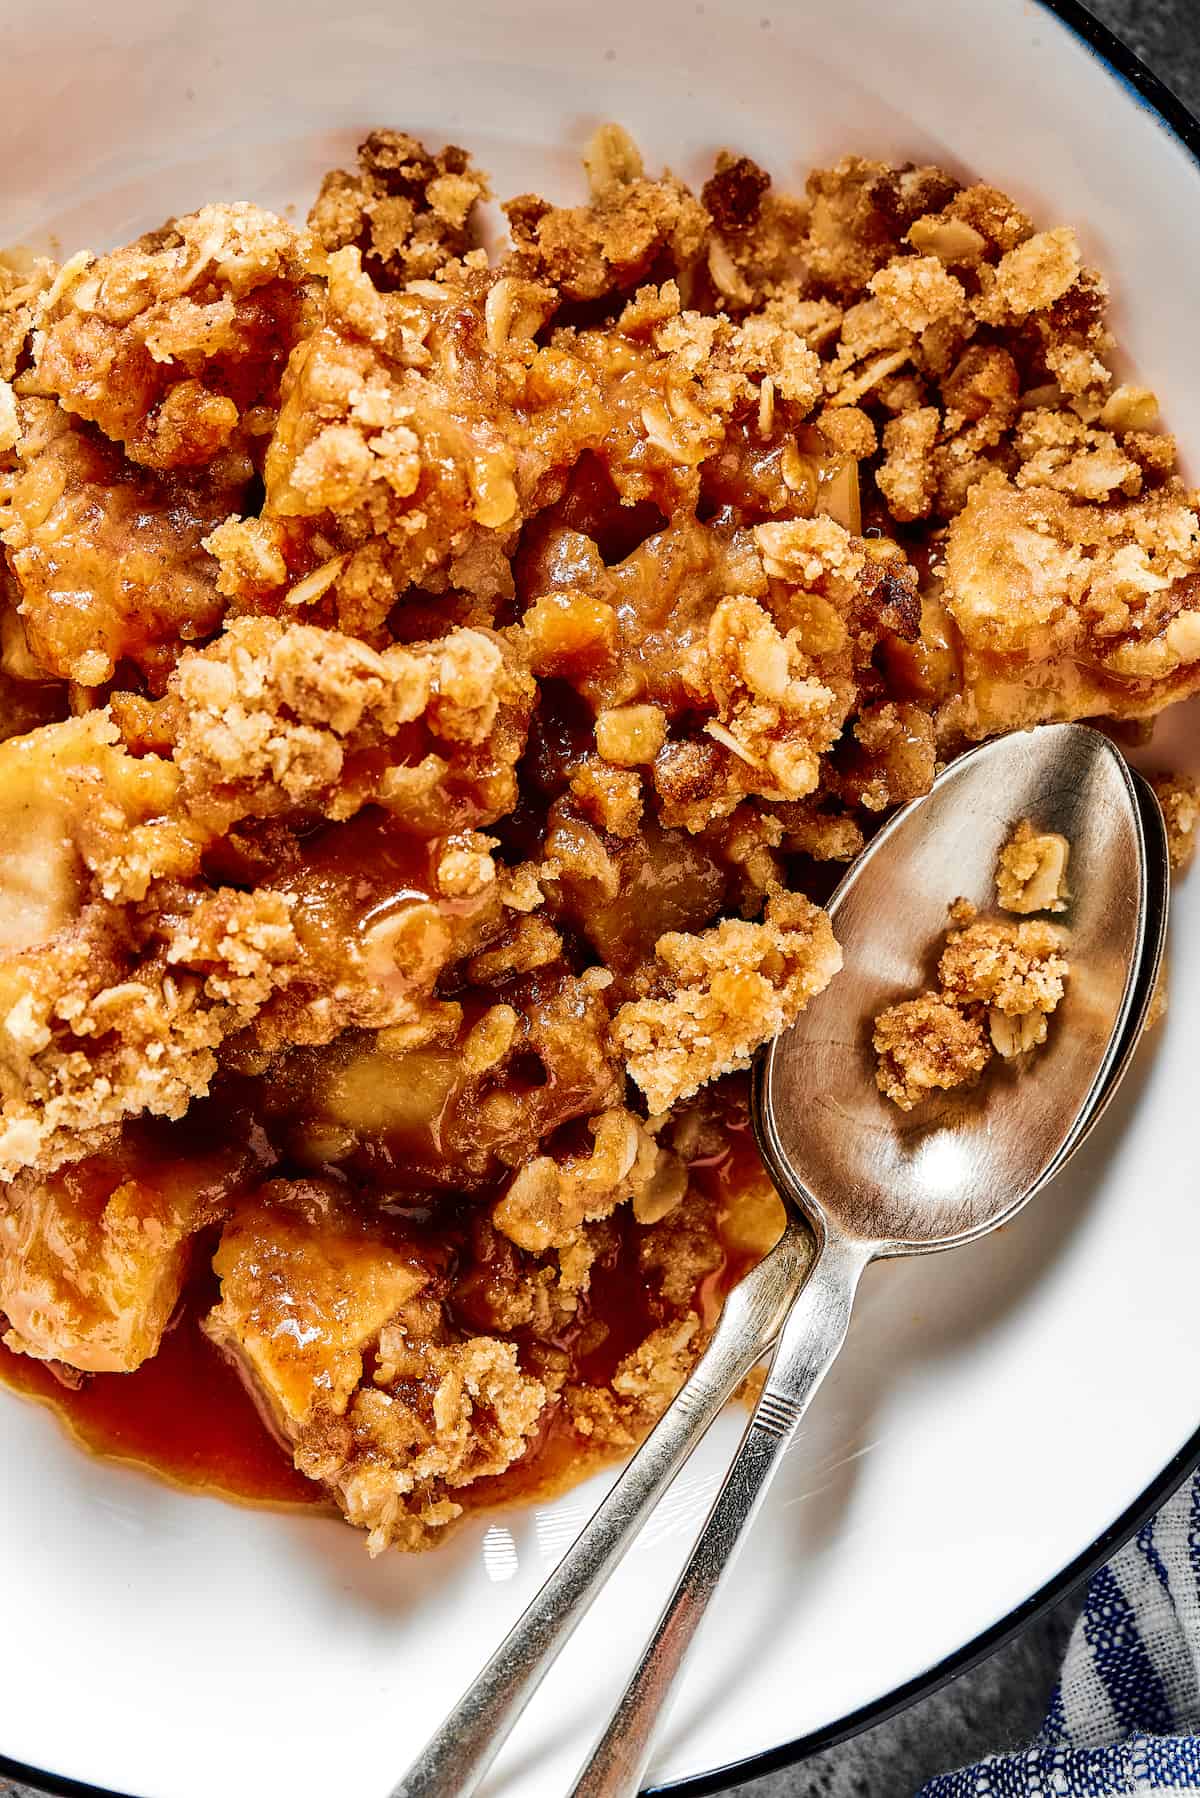 Close-up shot of apple crisp in a dessert bowl, with a spoon.